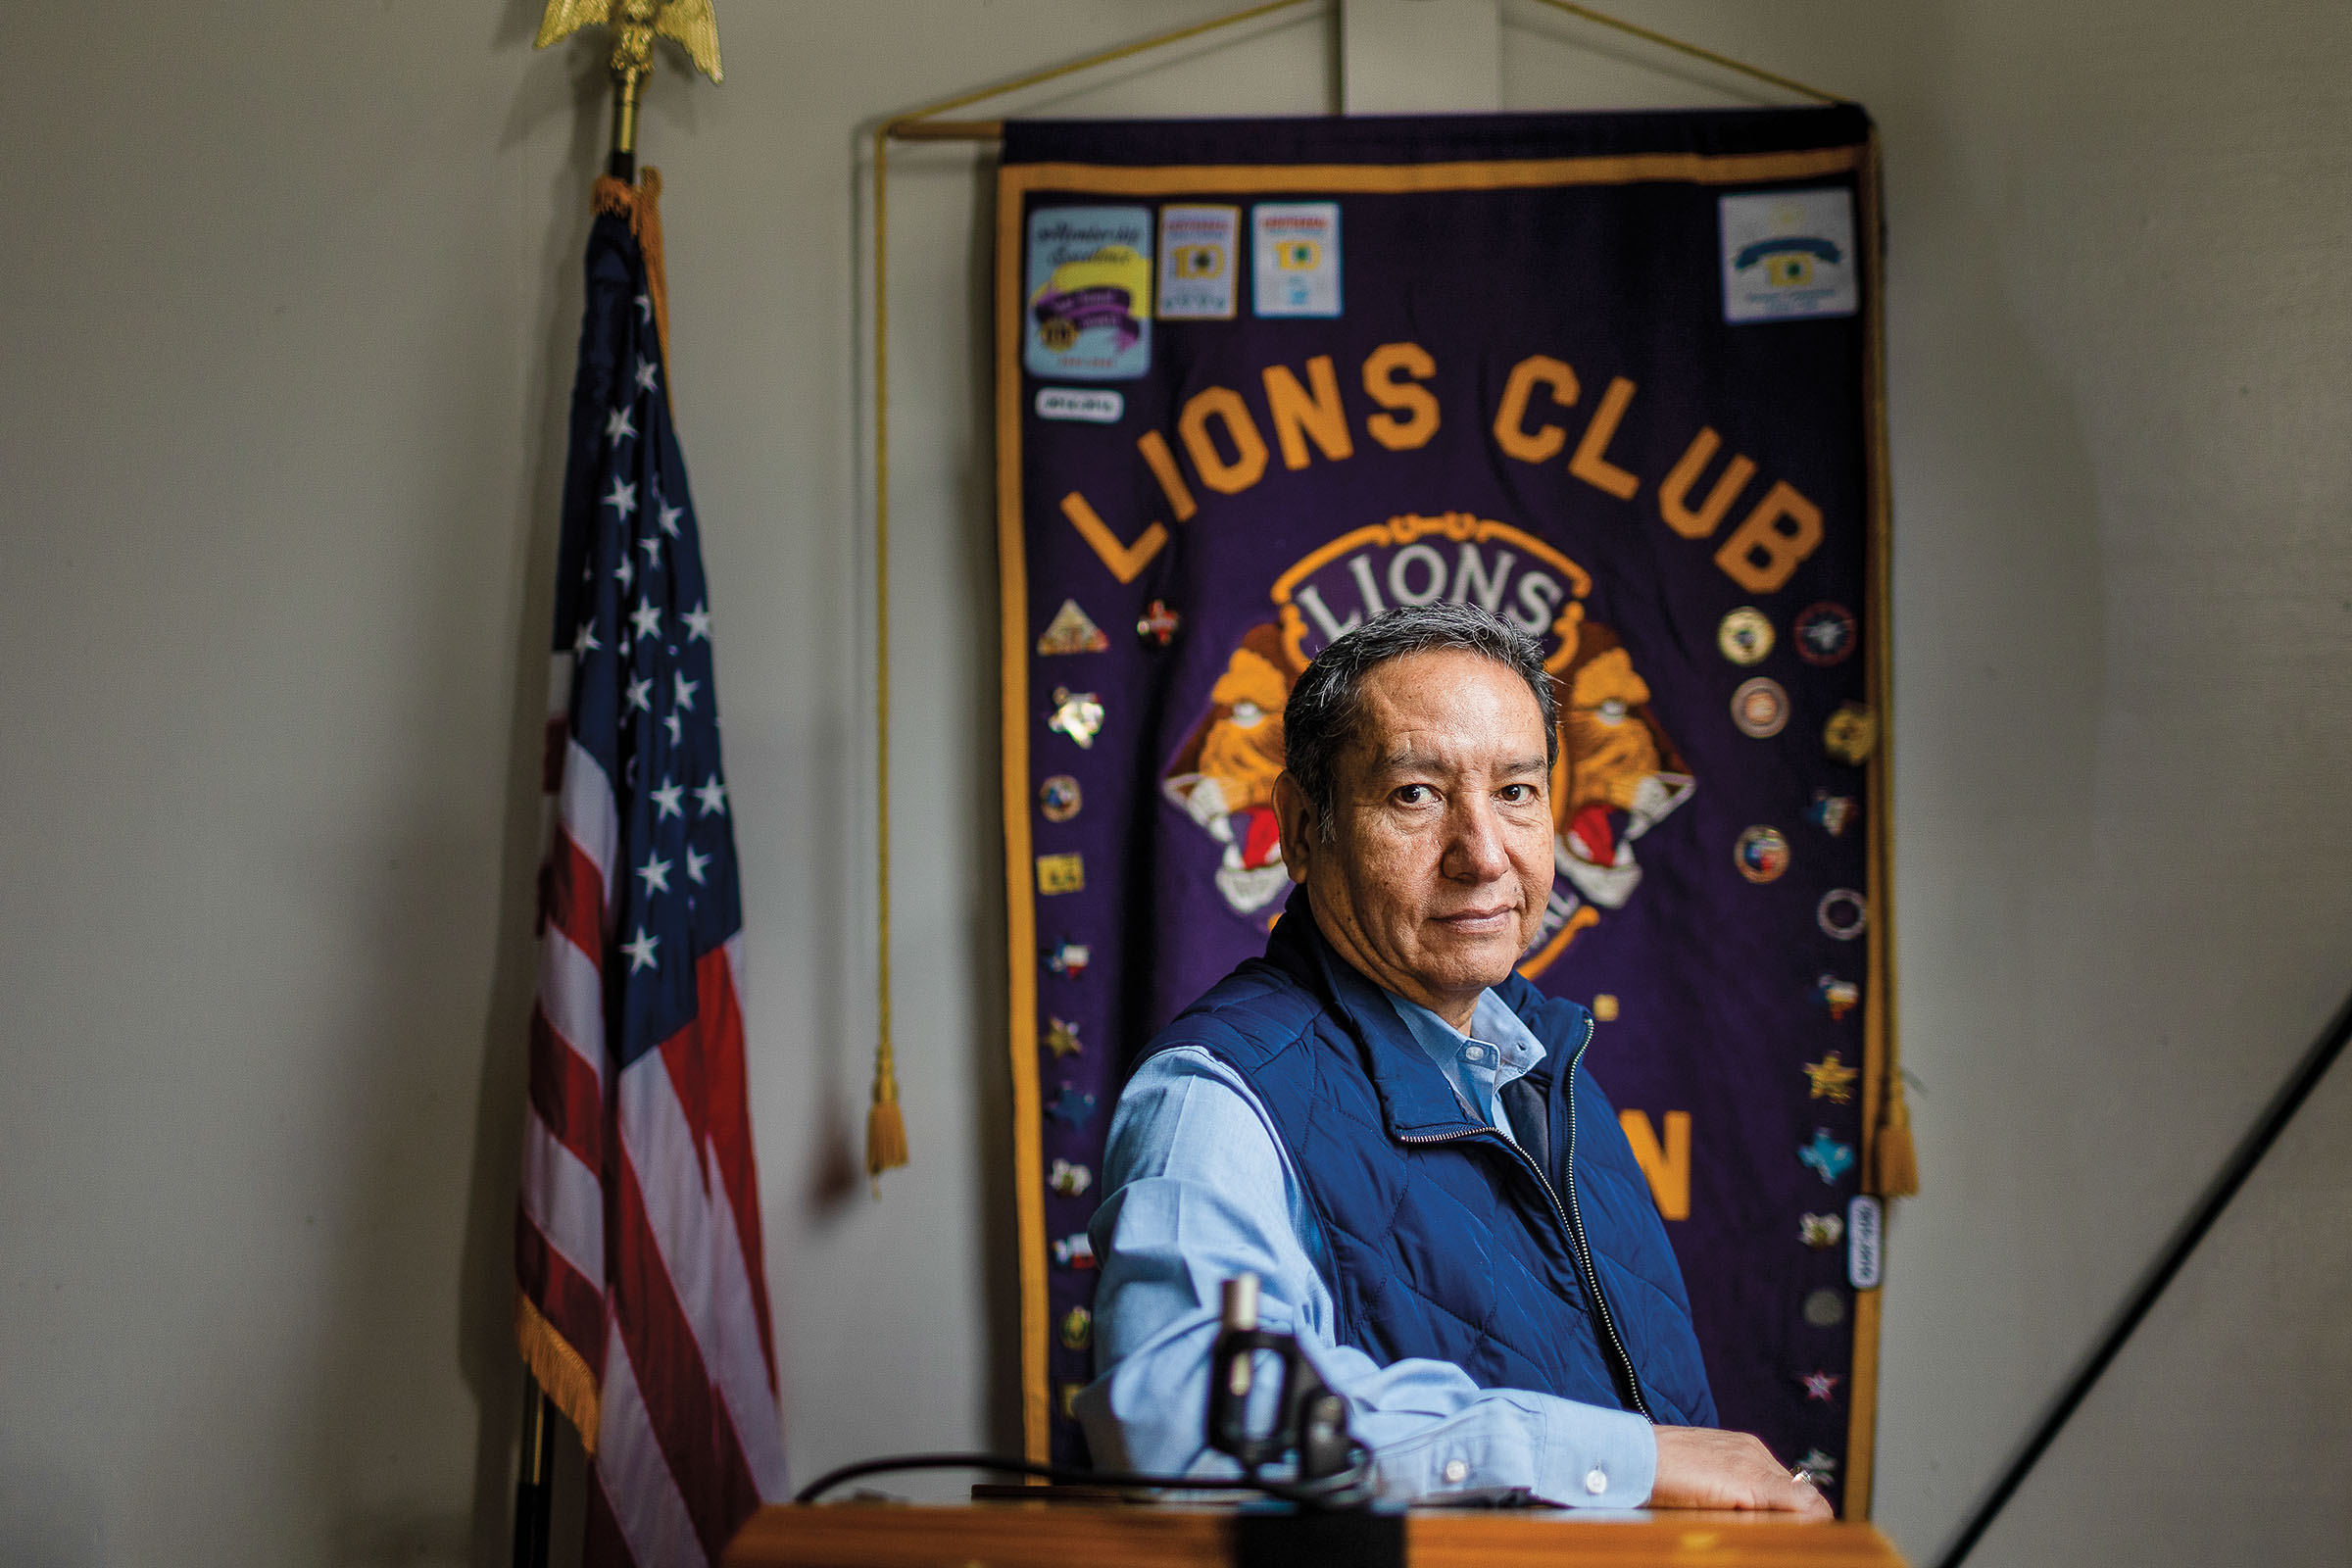 A man in a blue vest sits at a desk beneath a purple banner reading "Lions Club"